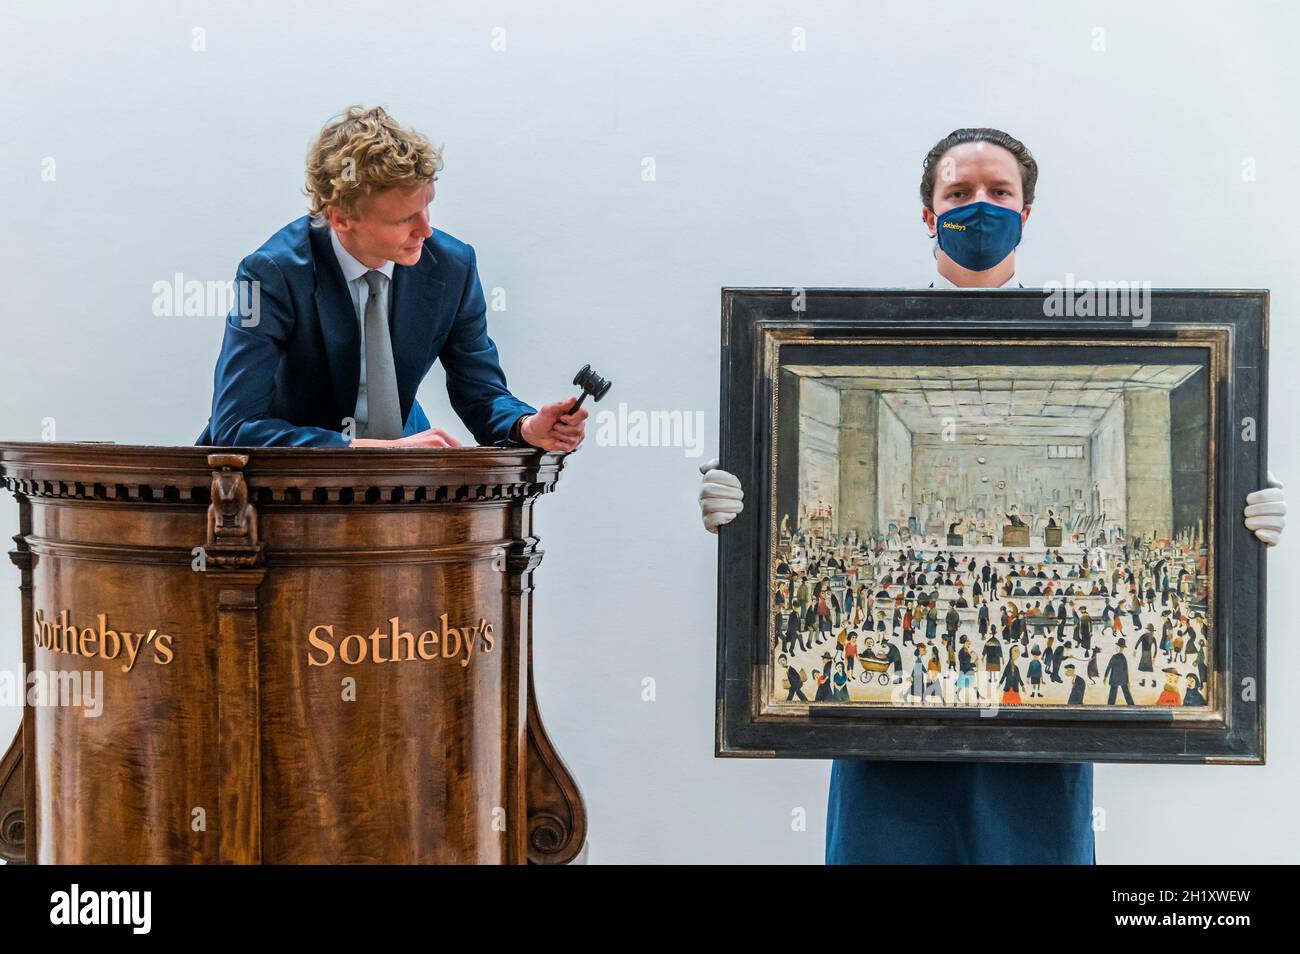 London, UK. 19th Oct, 2021. L.S. Lowry ‘The Auction' - The Artist's Only Known Painting of an Auction Room makes its Auction Debut at Sotheby's London this November, with an Estimate of £1.2 - 1.8 Million. Credit: Guy Bell/Alamy Live News Stock Photo